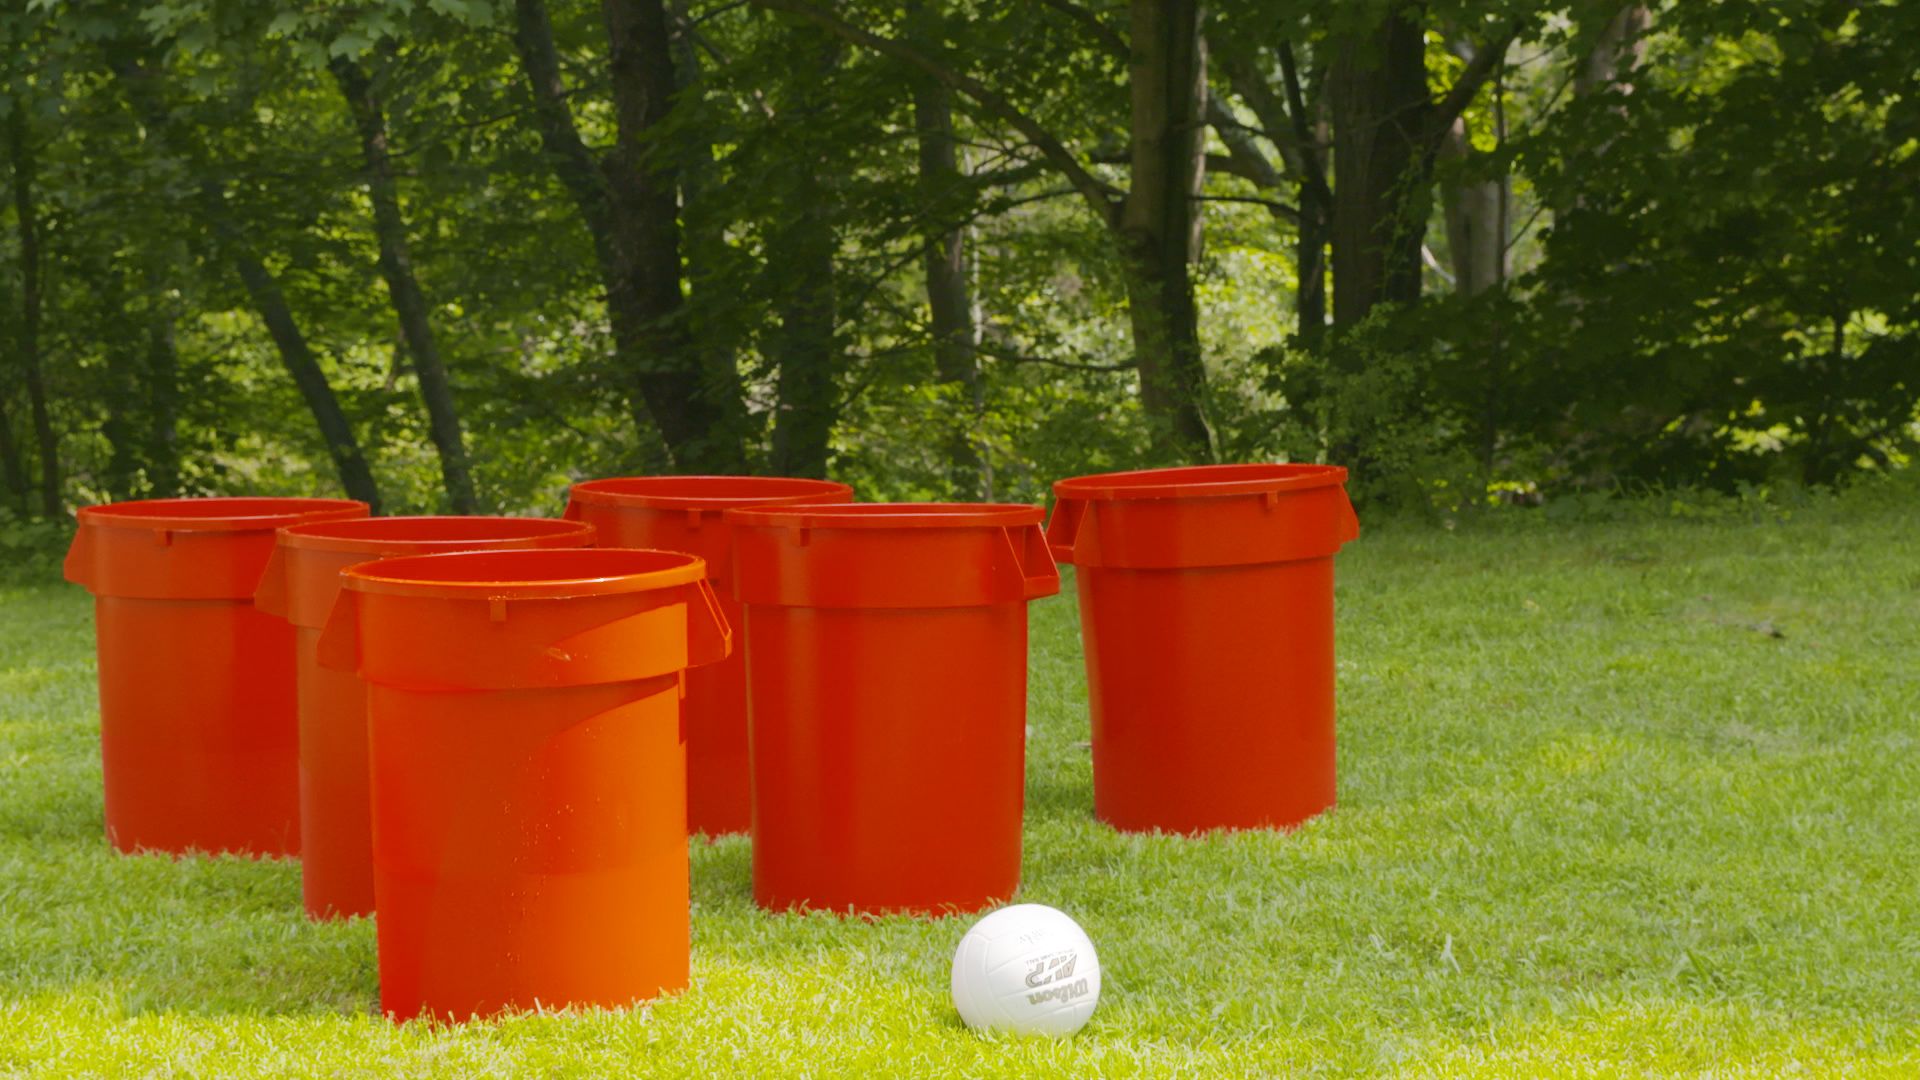 Ball to pilot disposable aluminum cups as an alternative to plastic